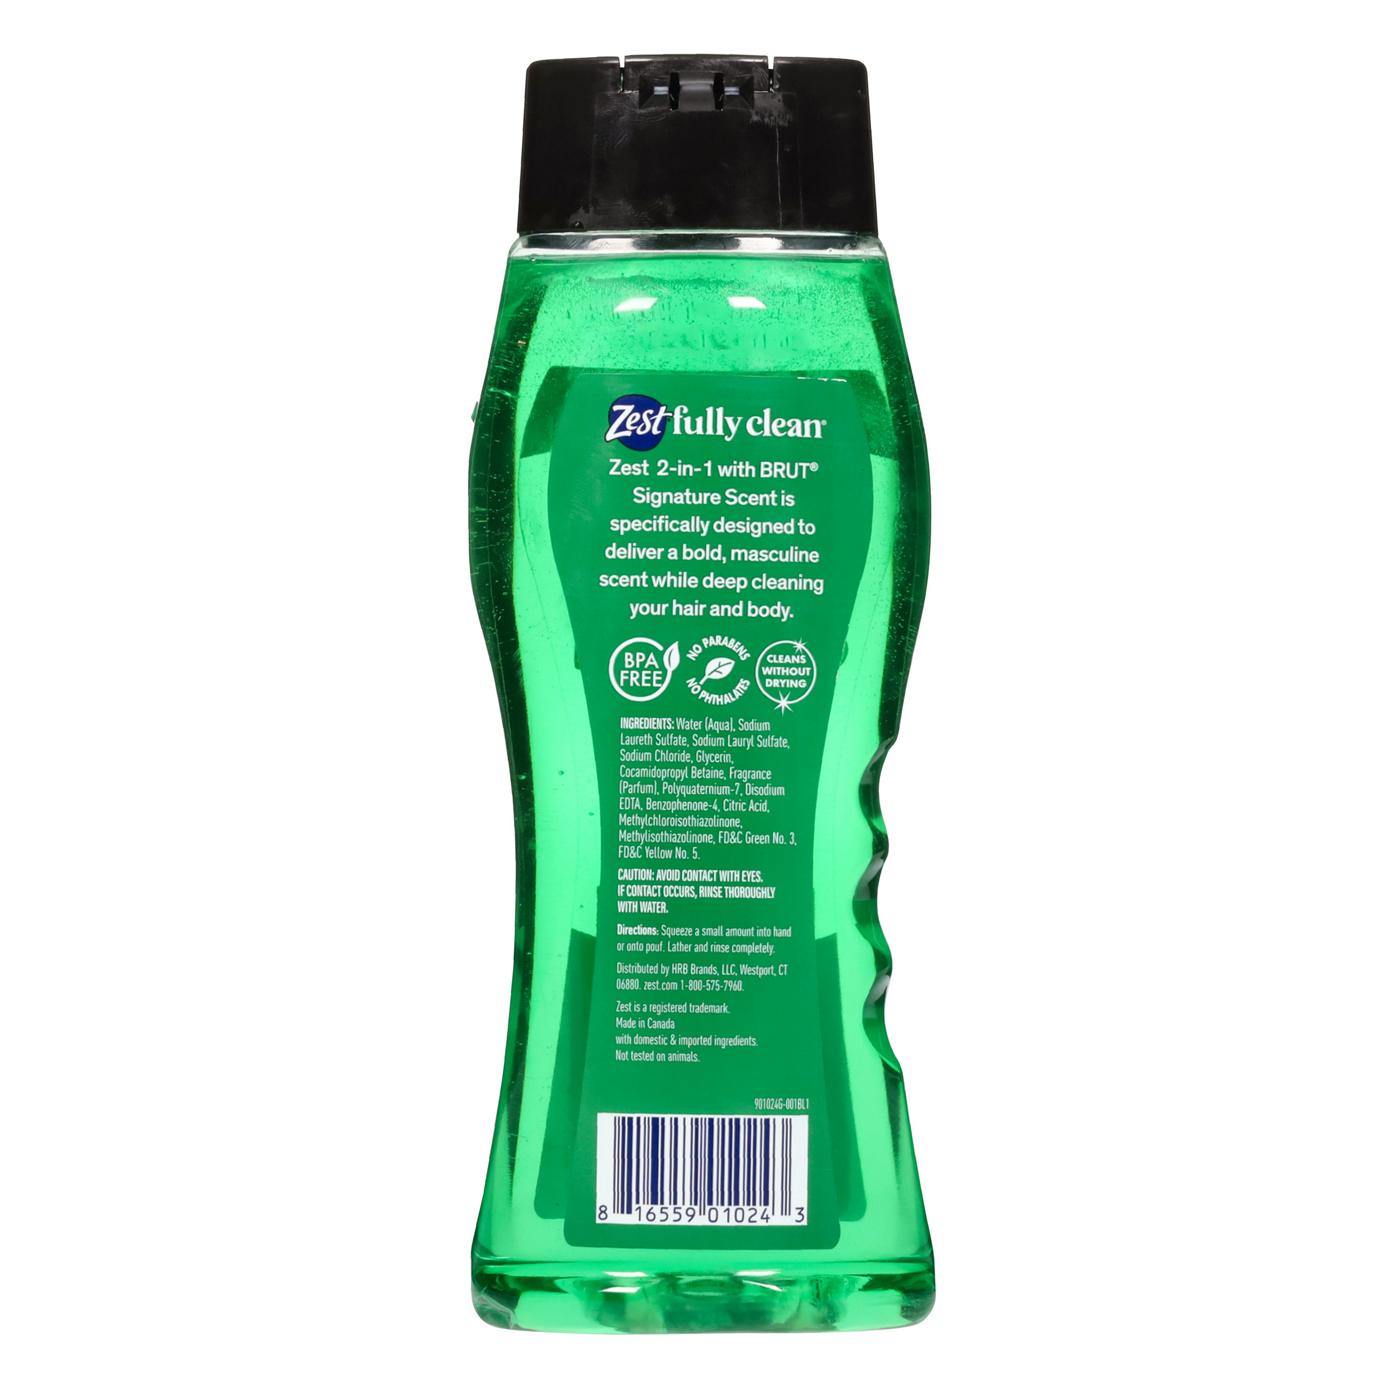 Zest For Men 2-in-1 Hair + Body Body Wash; image 2 of 3